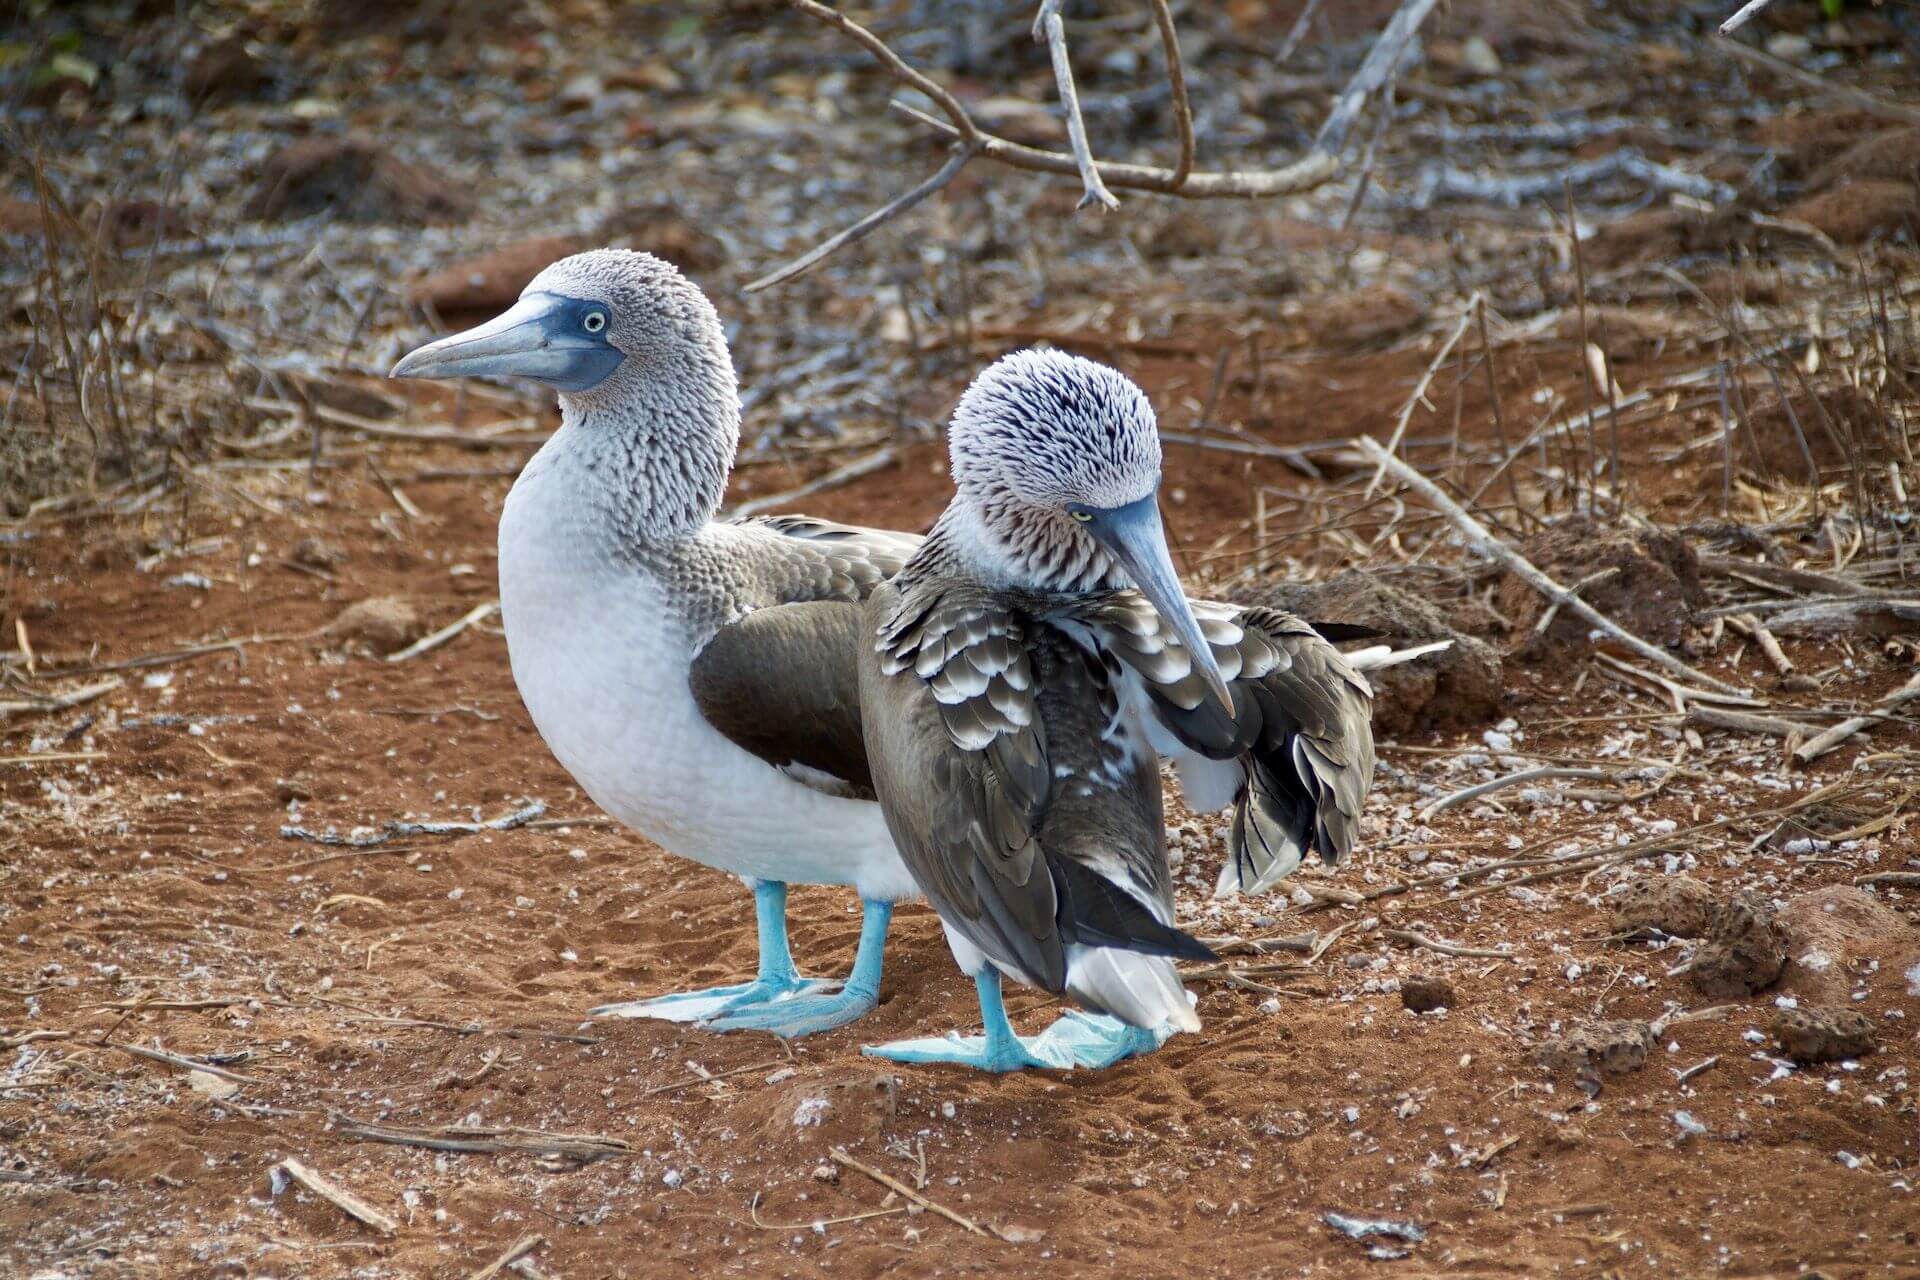 Blue footed boobies in the Galápagos